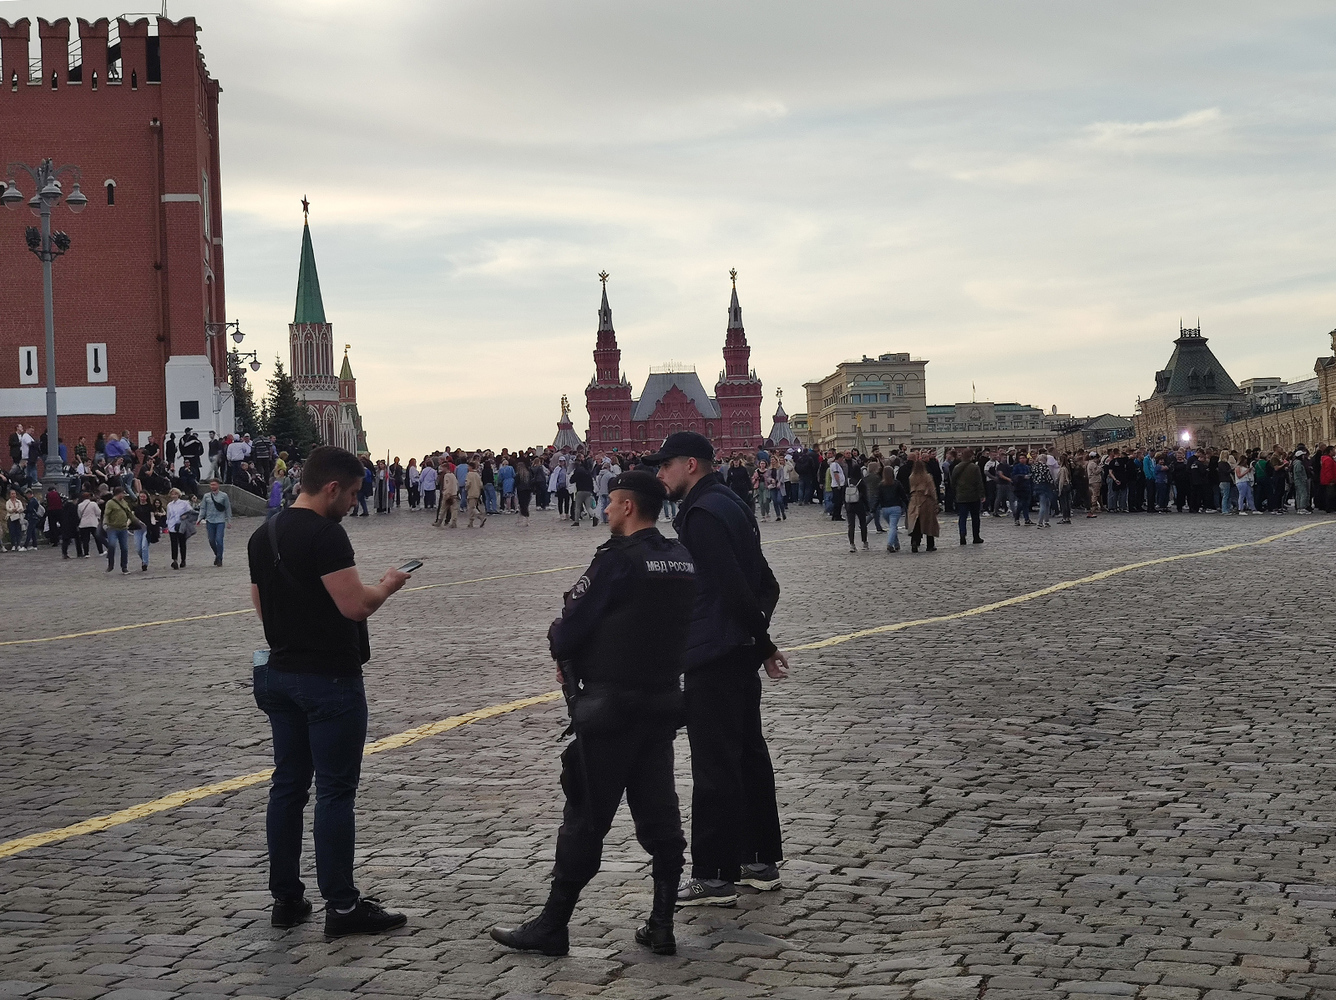 Spectators of the concert on Red Square for Reunification Day: footage of those gathered